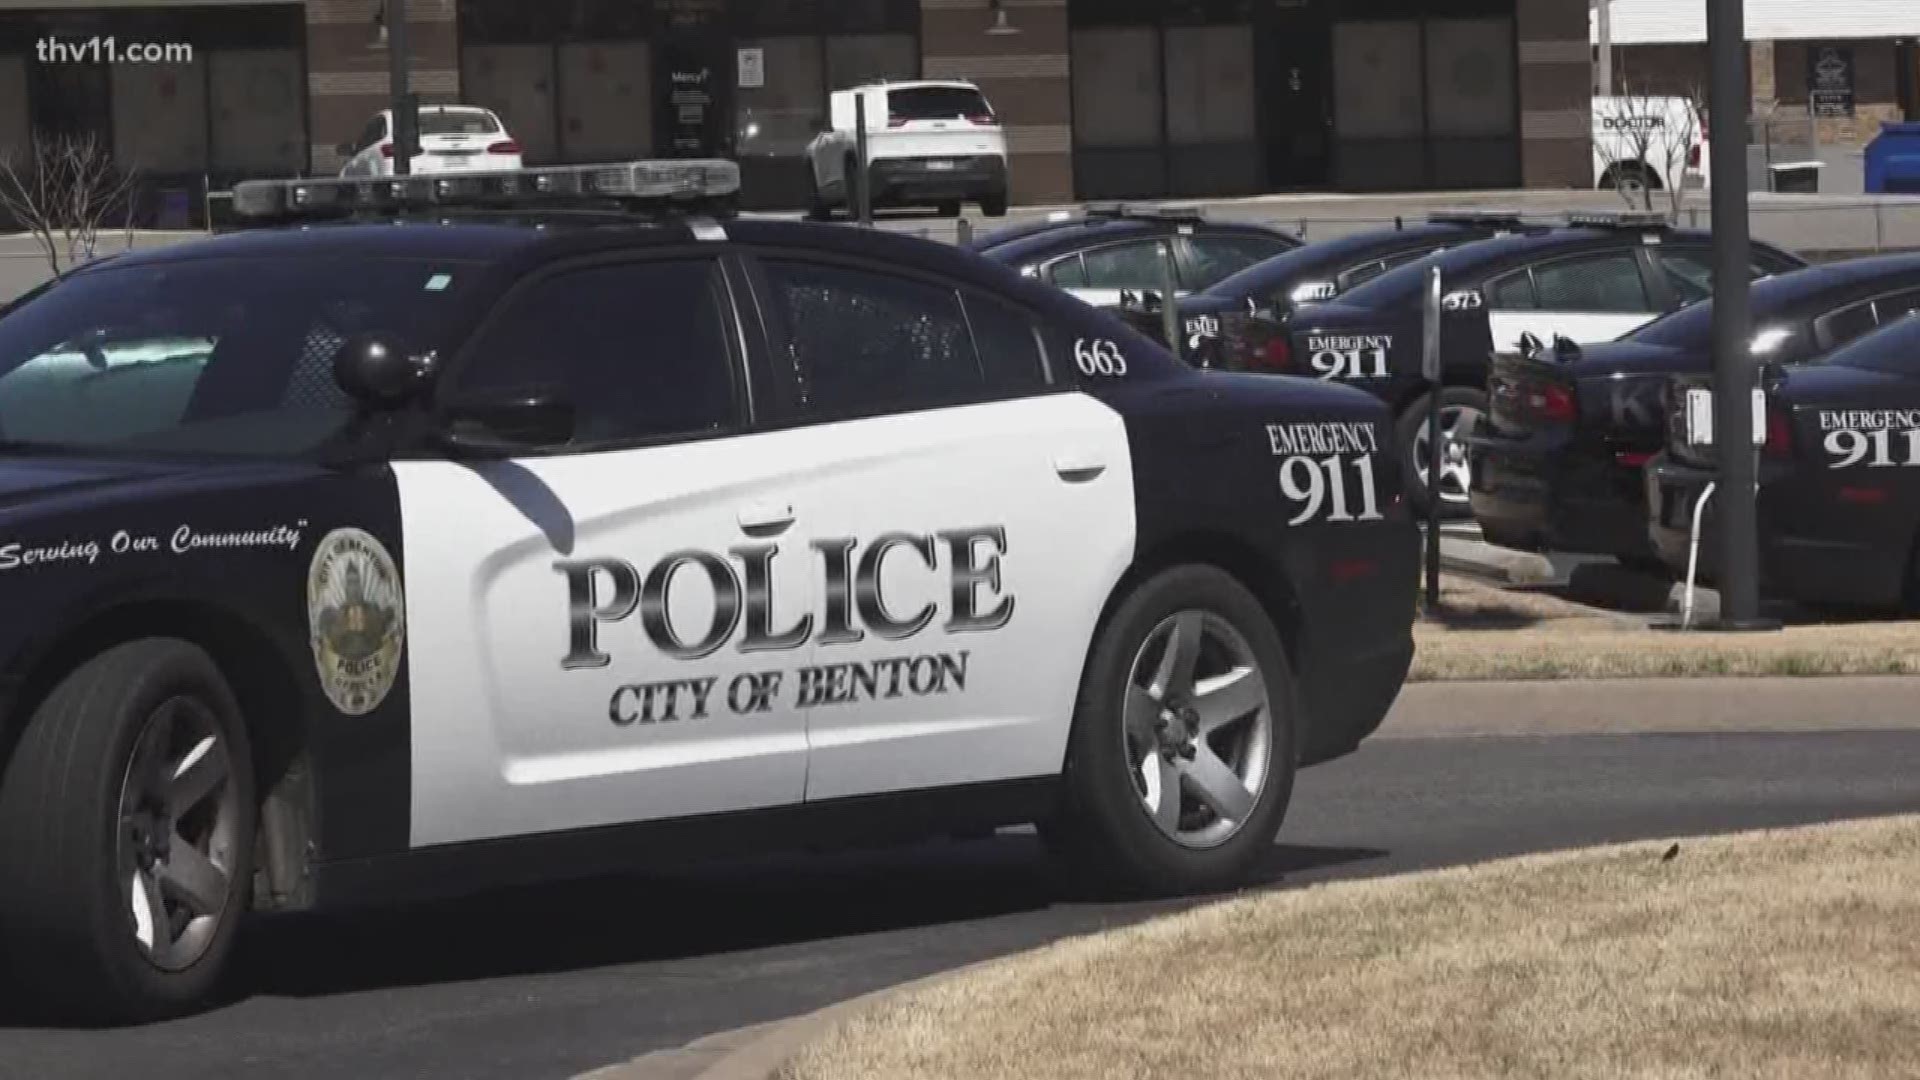 There's a rising concern for the Benton Police Department.